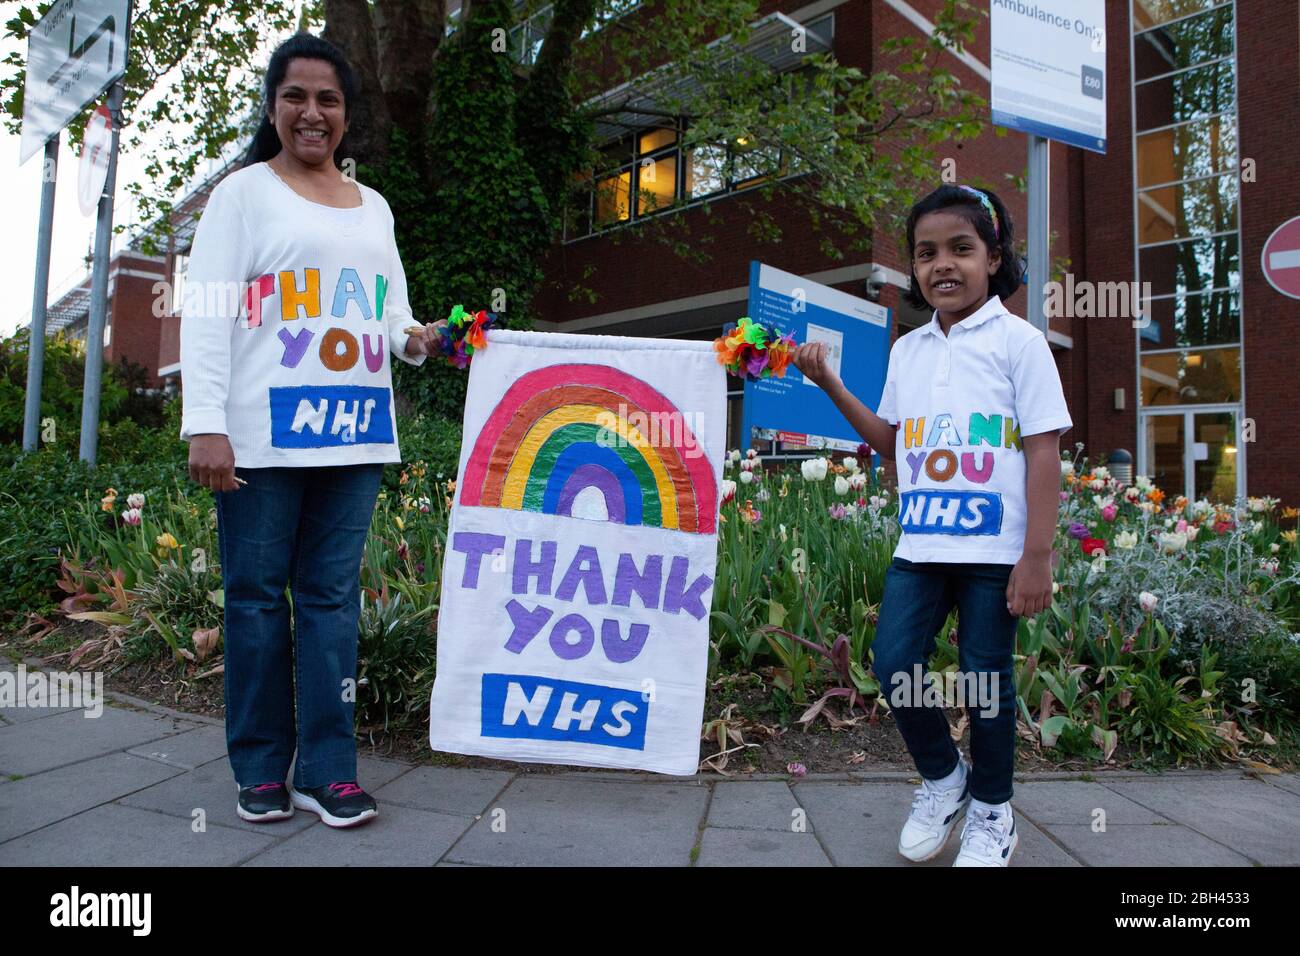 London, UK, 23 April 2020: medical and support staff gathered at the A&E ambulance bay at St George's Hospital, Tooting, to join Clap For Our Carers. This 4-year old girl, Eden, had made a rainbow banner and she and her mother wore home-made 'Thank You NHS' t-shirts. Anna Watson/Alamy Live News Stock Photo